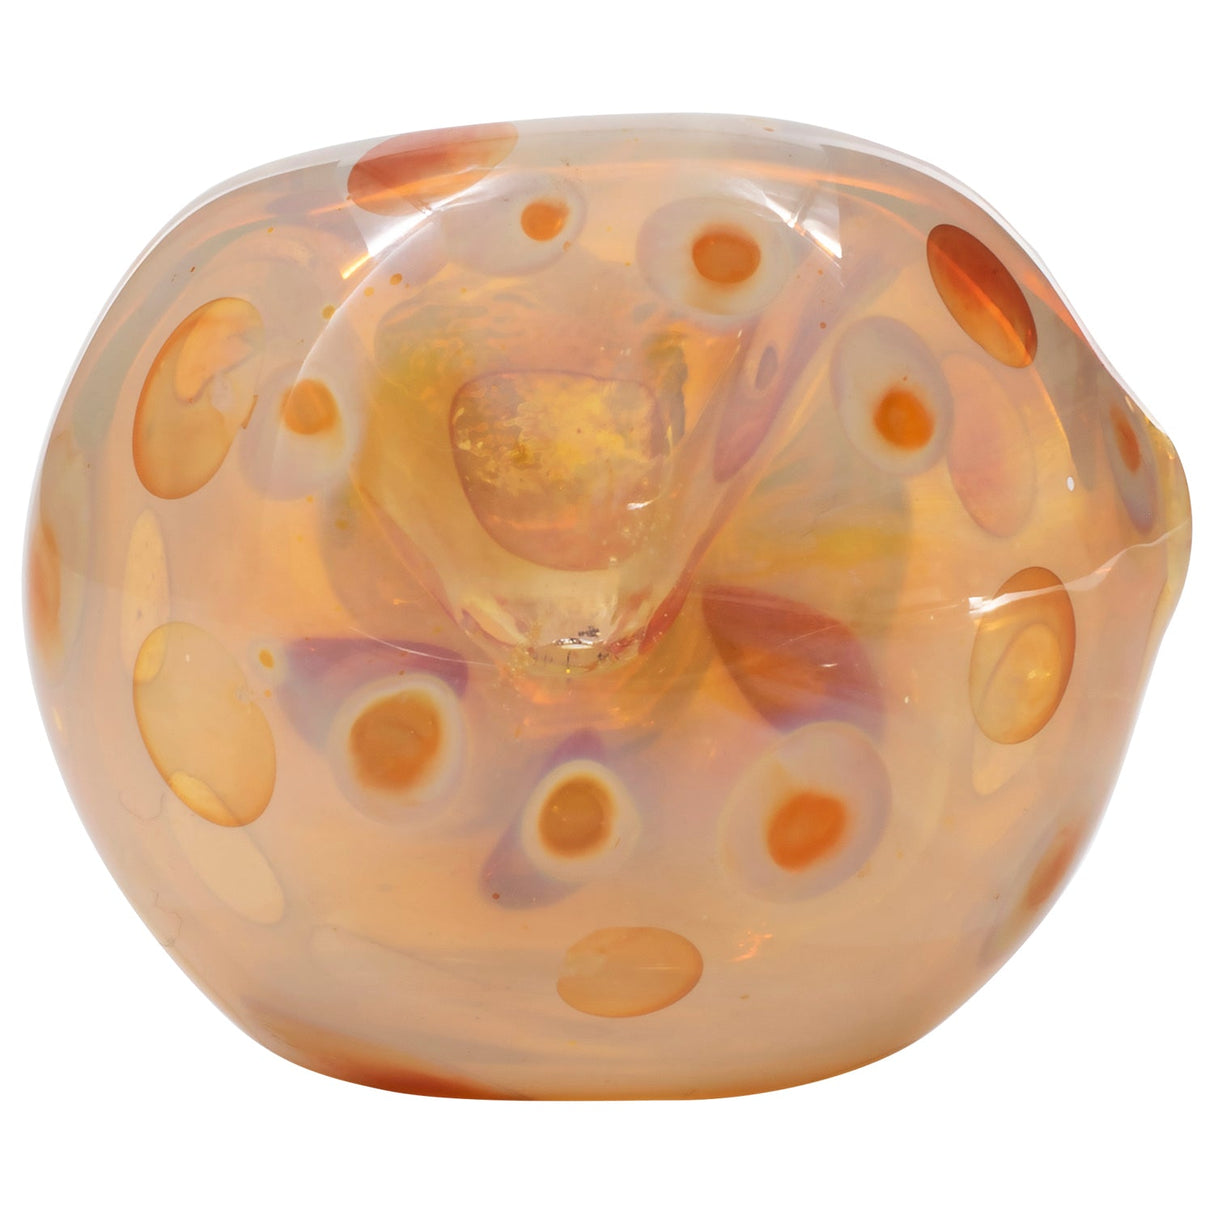 LA Pipes Polka Dot Glass Spoon Pipe in Assorted Colors, Top View, Borosilicate Glass